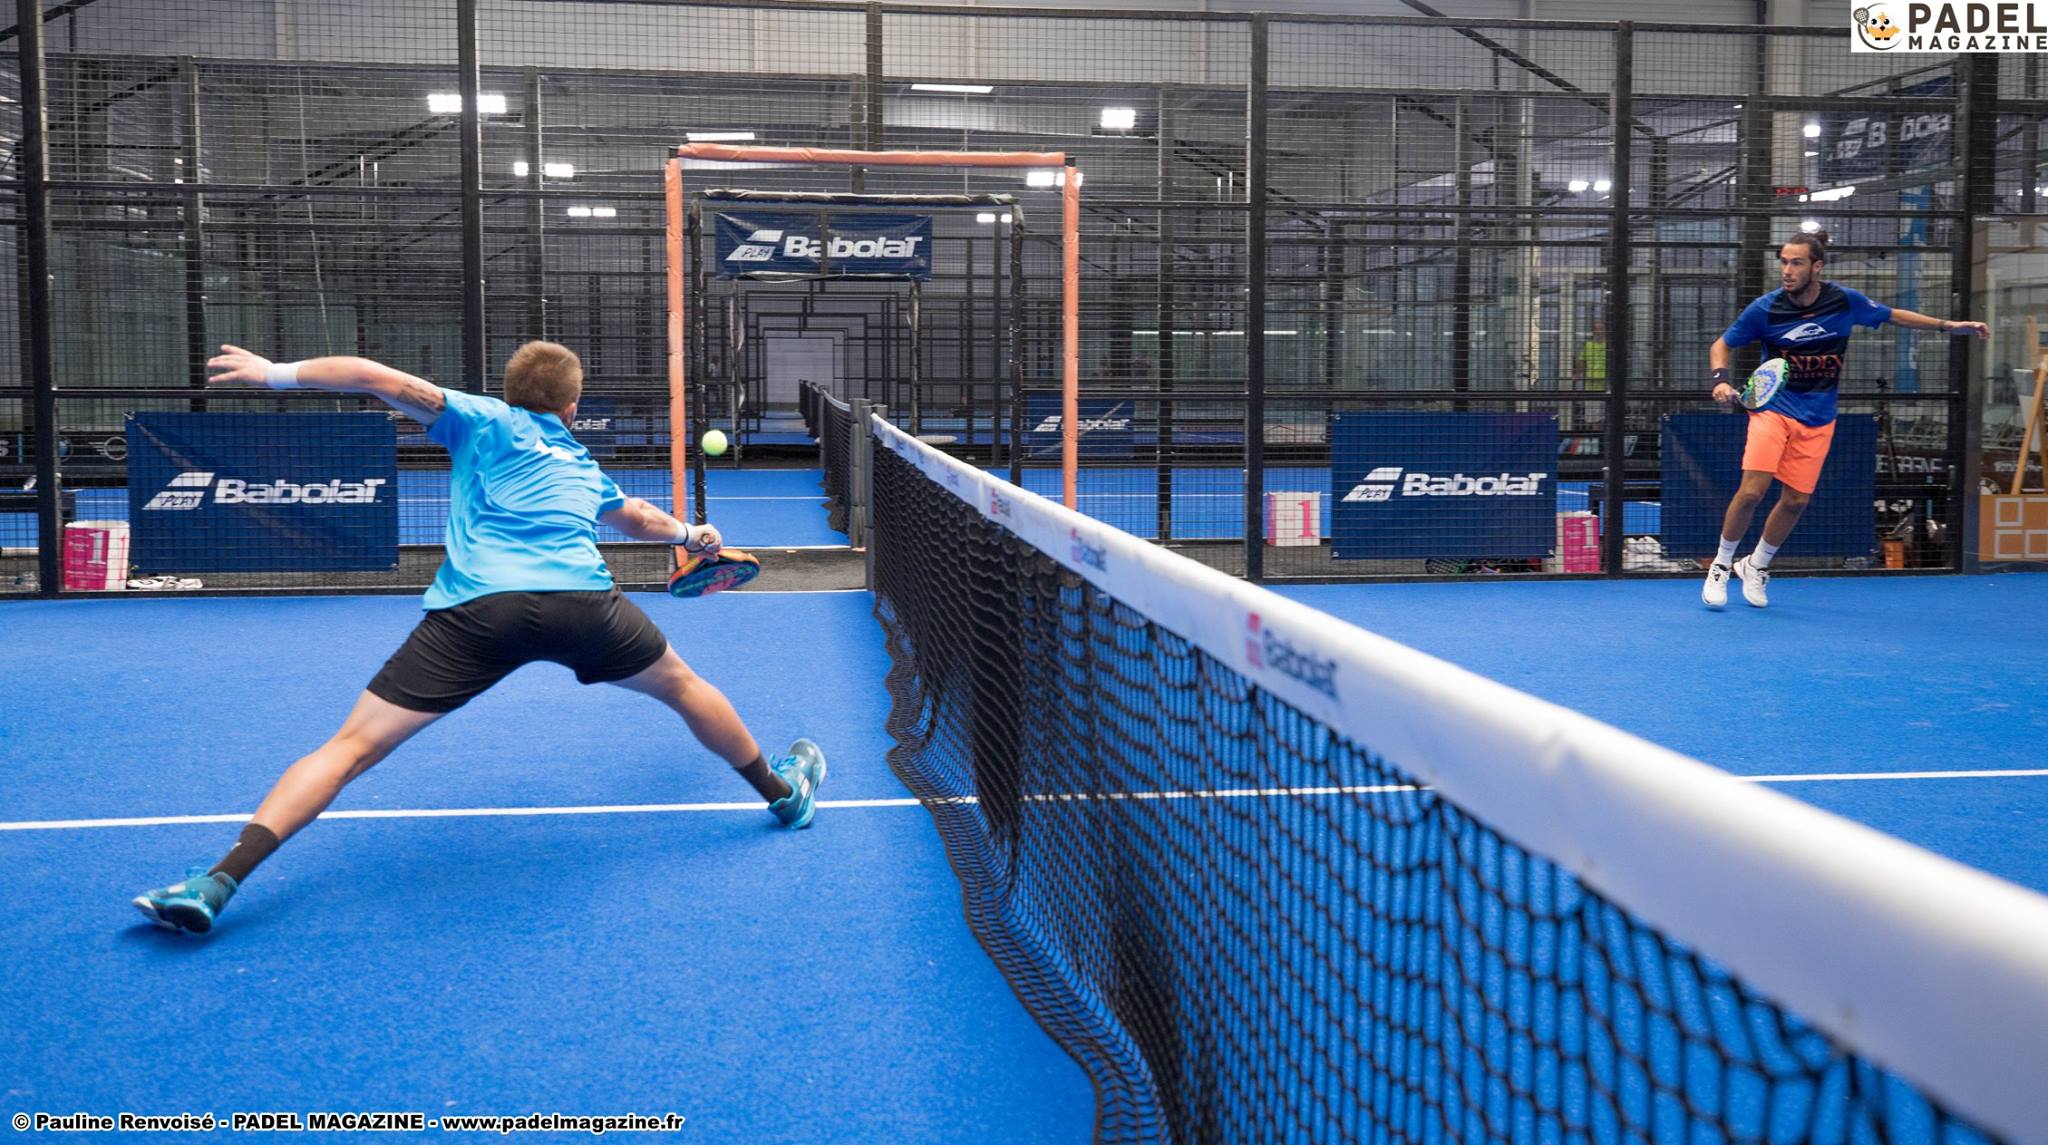 Padel in Competition: risk of tension?